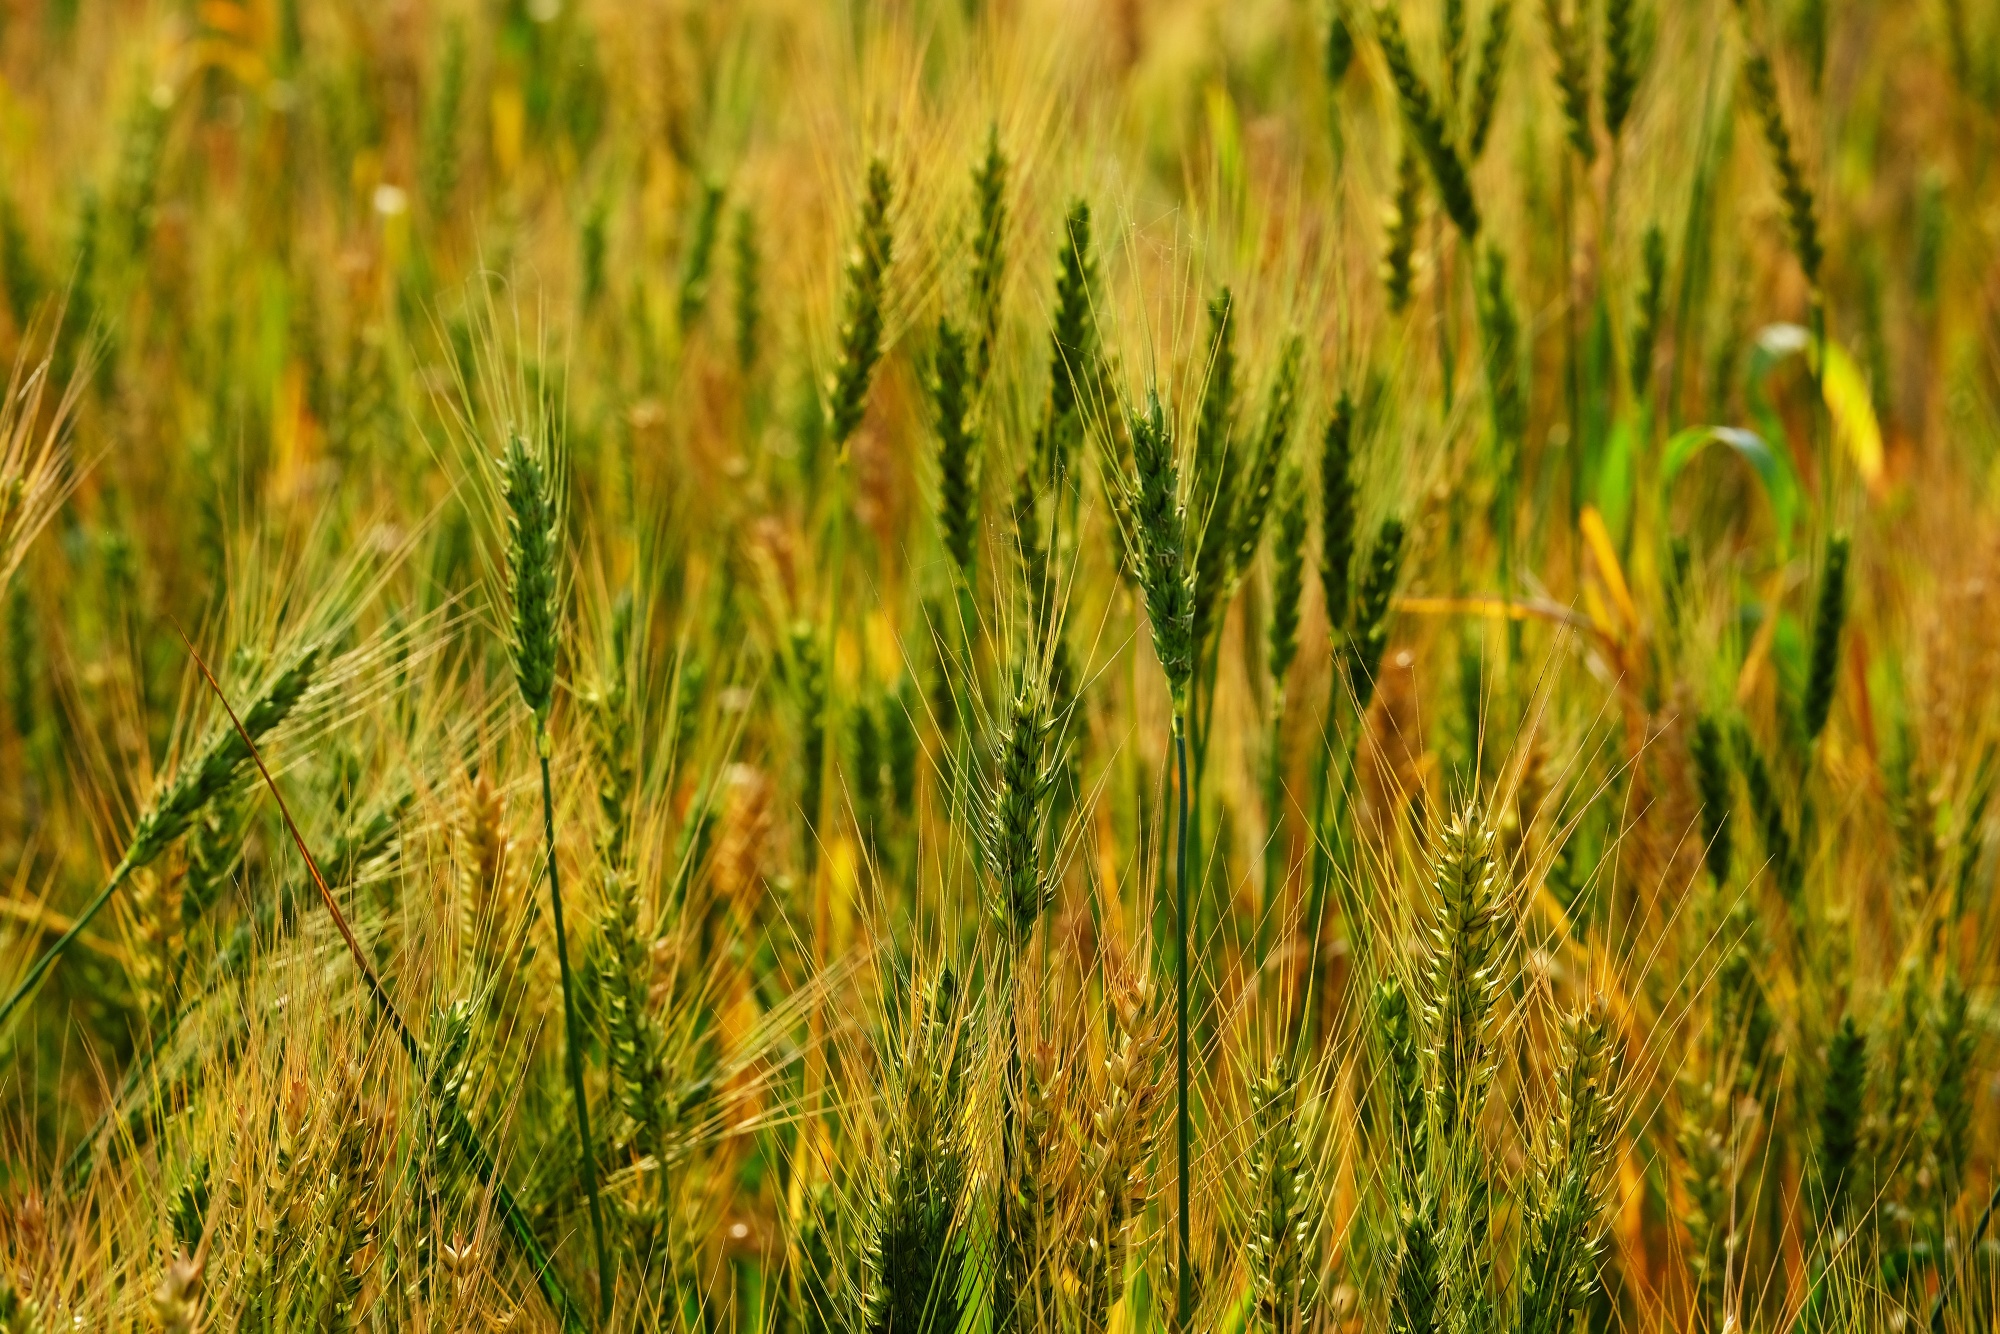 Stalks of wheat in a field in India on March 7.